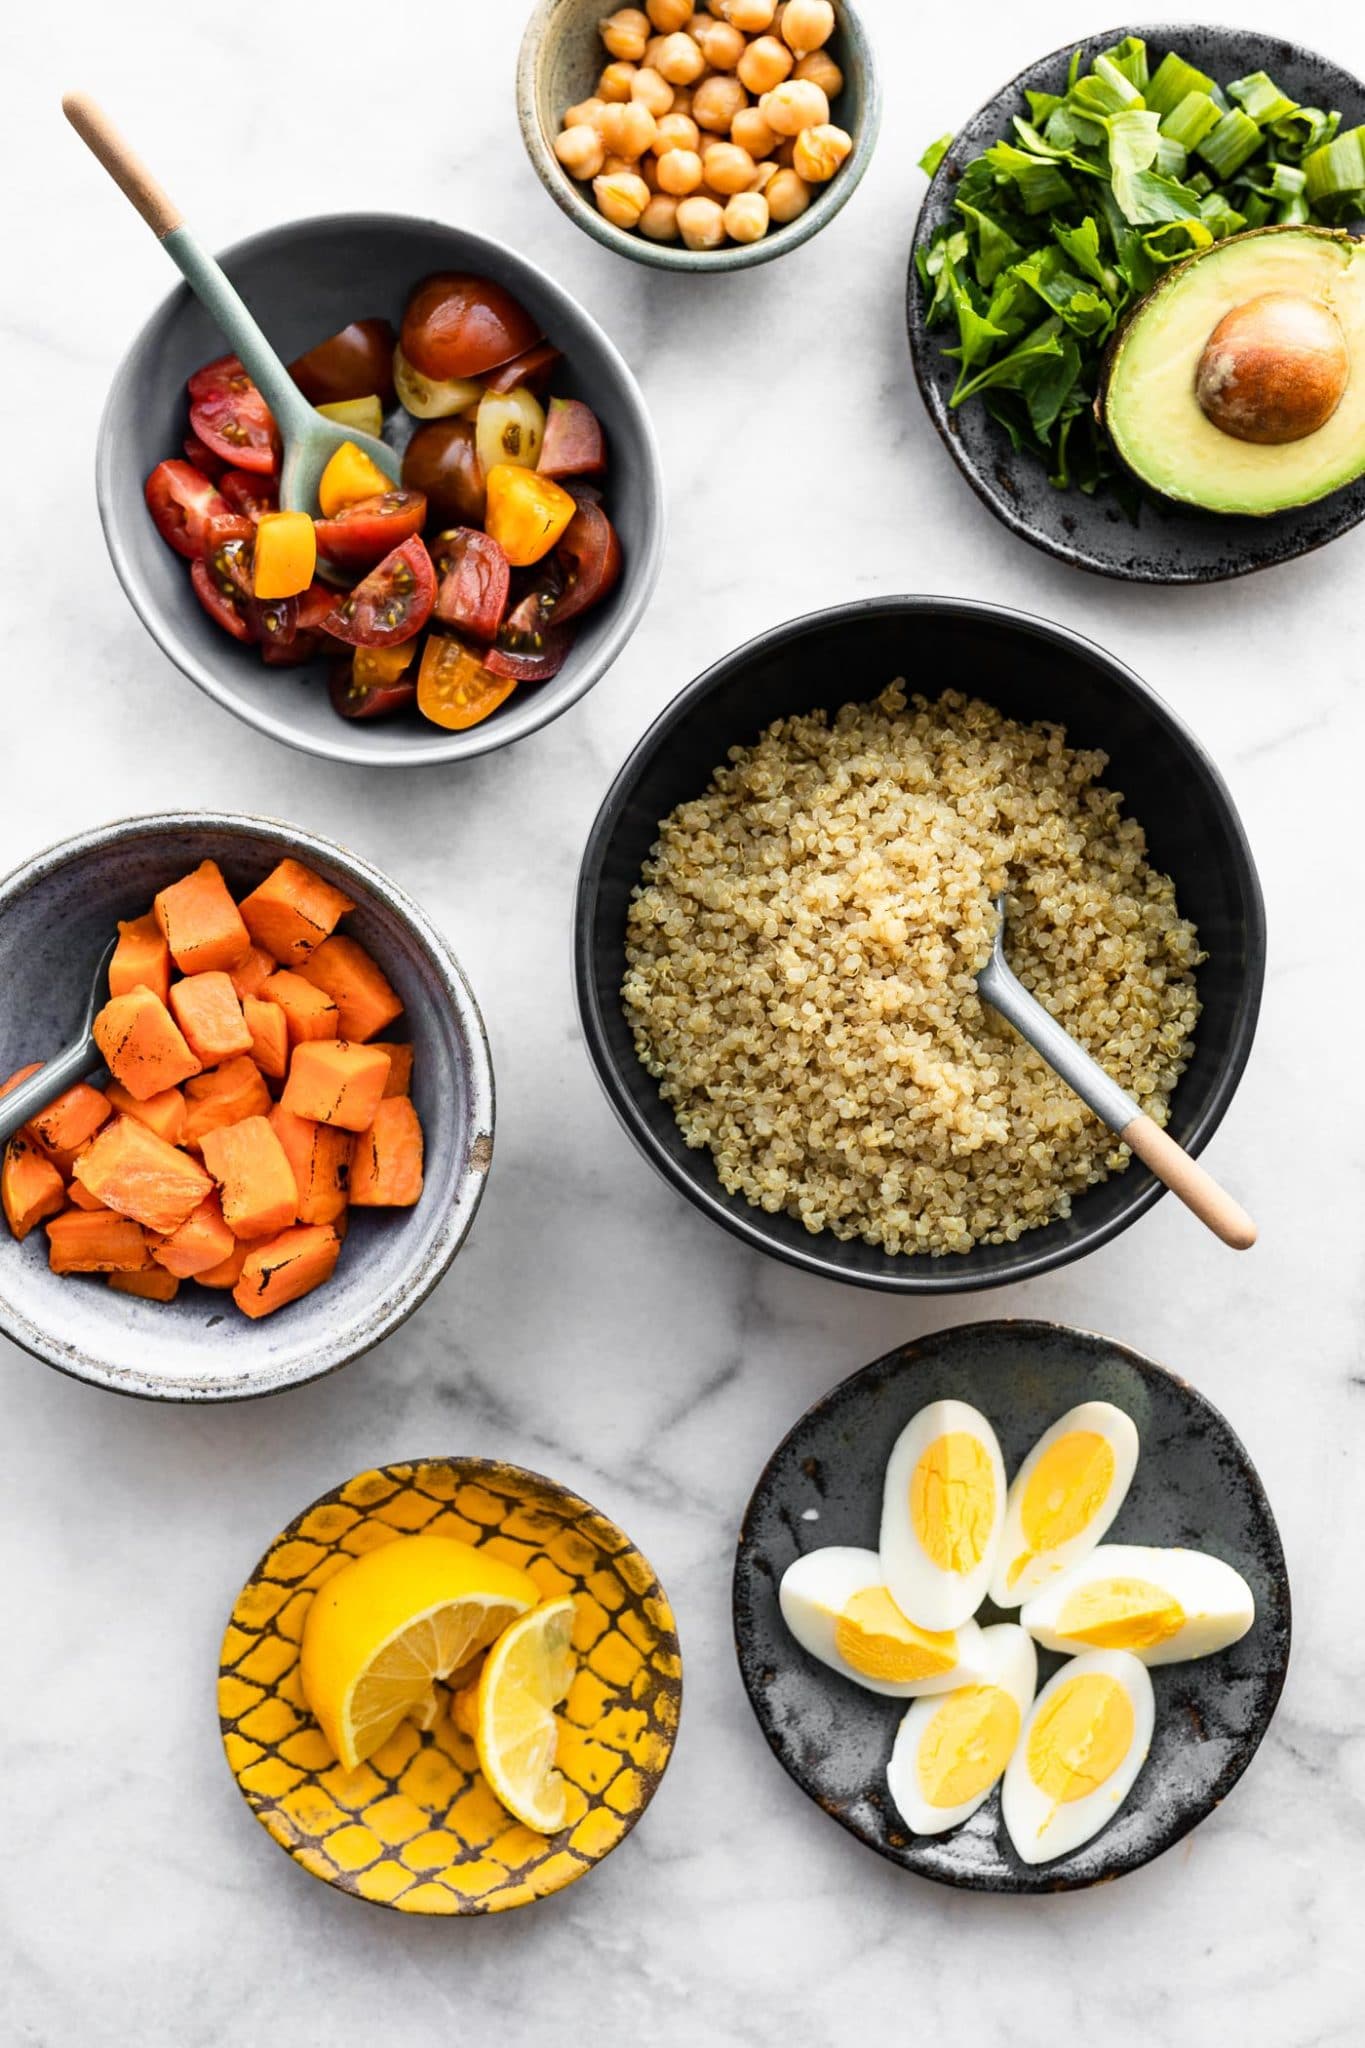 bowls containing ingredients for savory quinoa breakfast bowls including lemon wedges, boiled eggs, quinoa with a serving spoon, roasted sweet potatoes with a serving spoon, sliced tomatoes with a serving spoon, chickpeas, spinach, and half an avocado